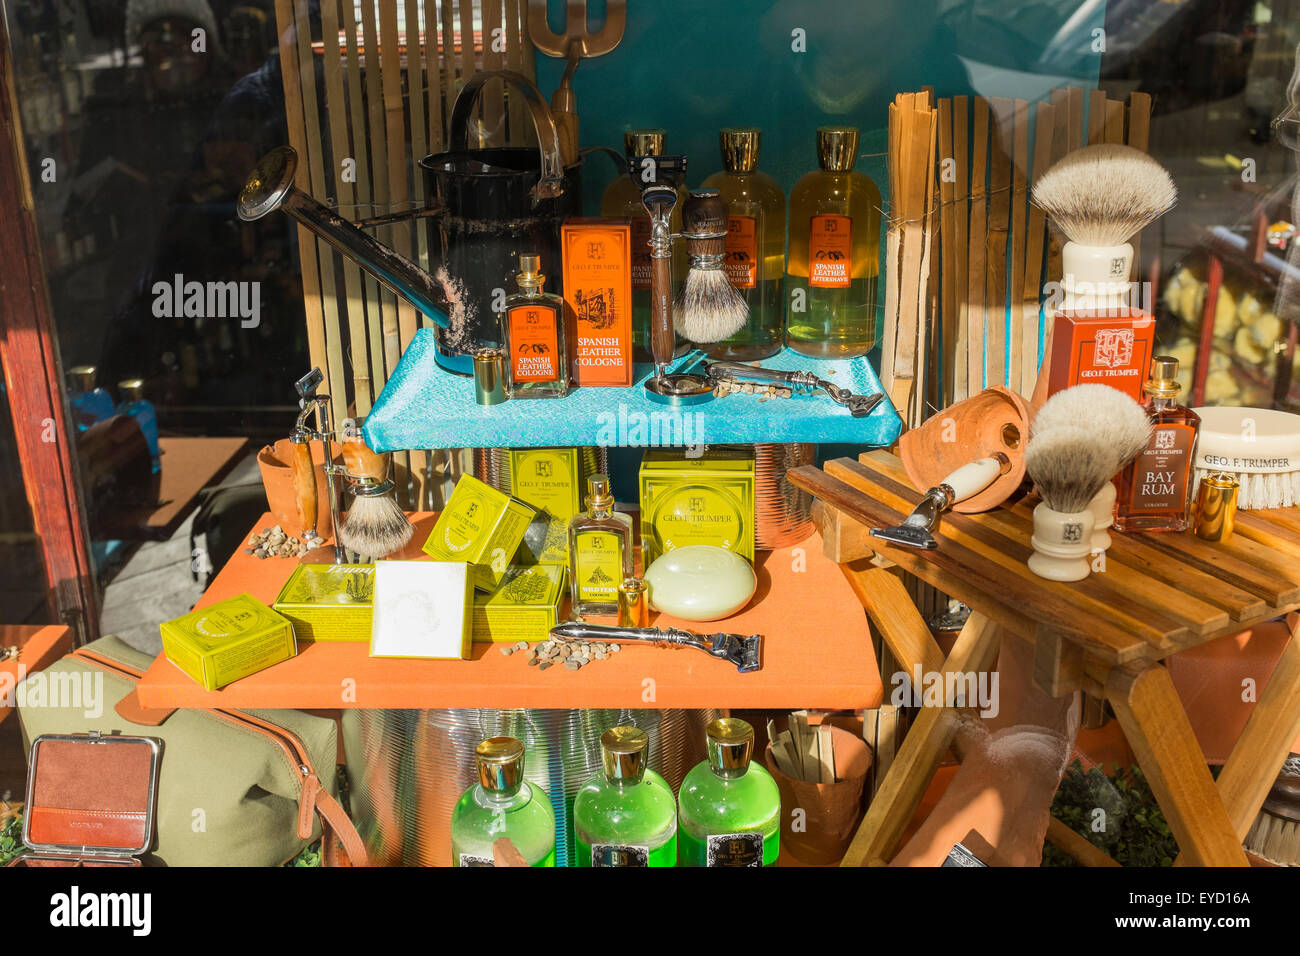 Widow display by G F Trumper, a traditional barbershop, in Mayfair, London, UK Stock Photo